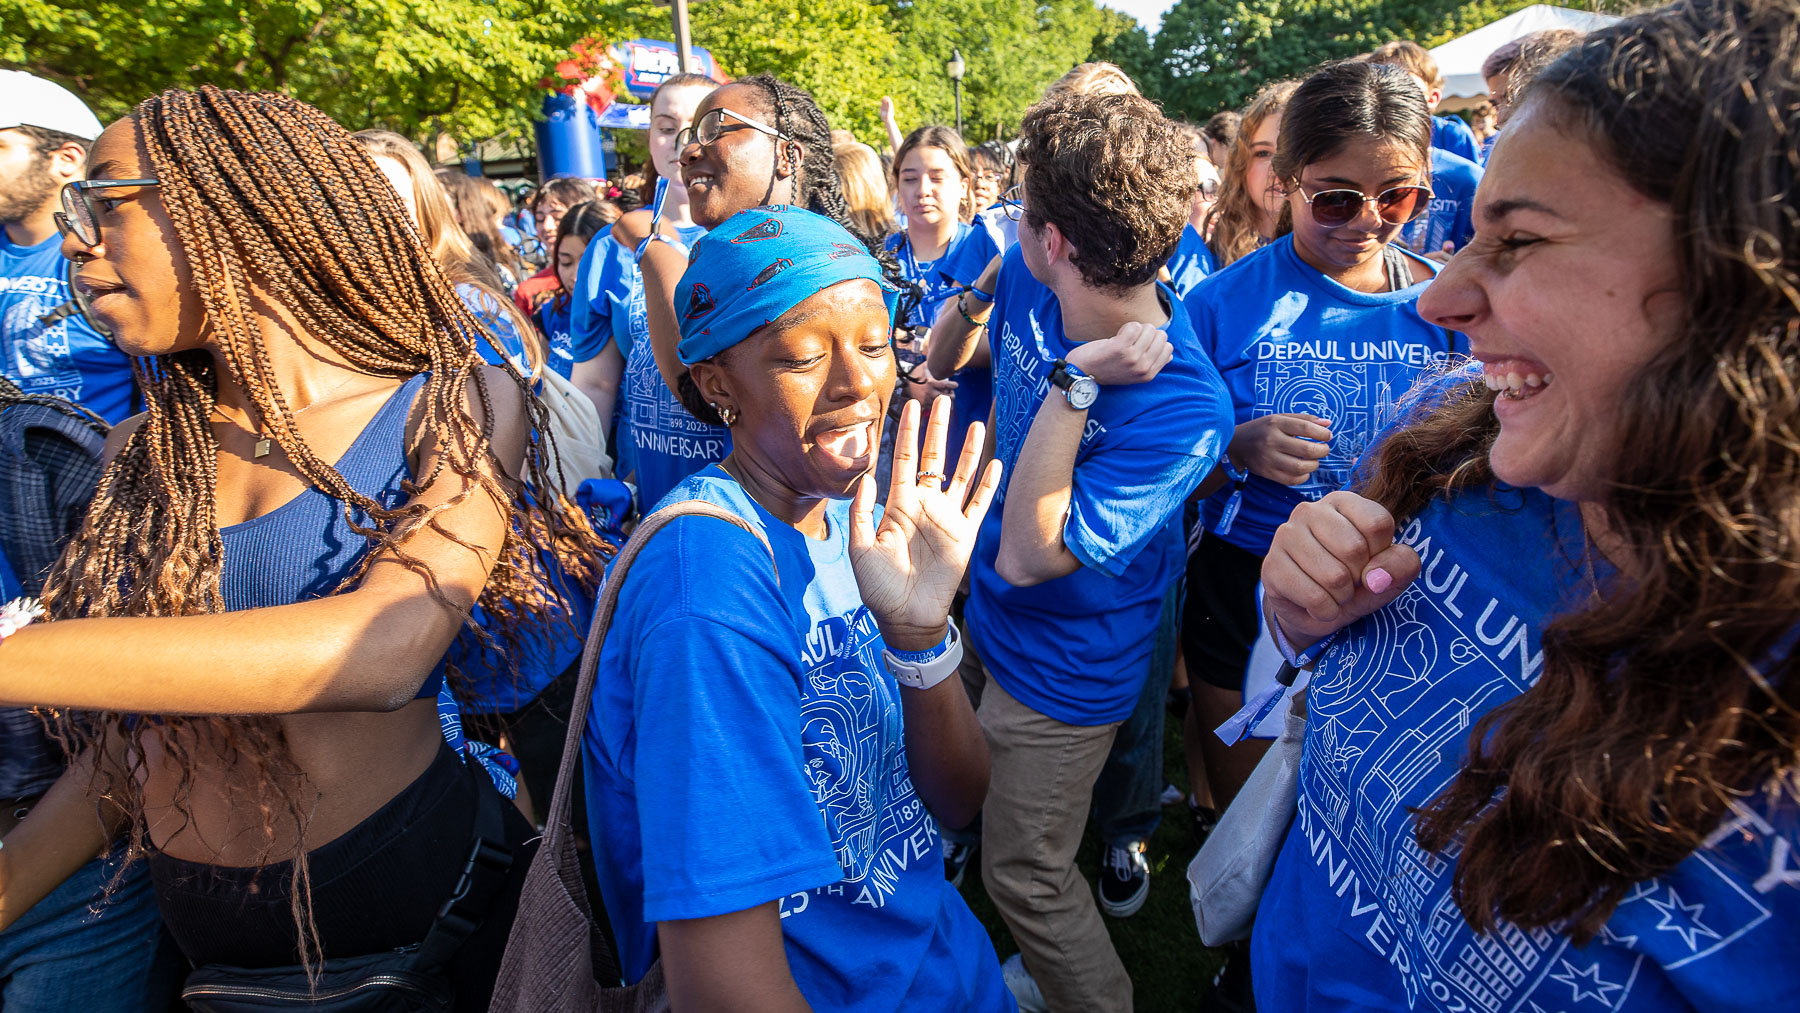 Students danced to DJ music late into the afternoon. (DePaul University/Jeff Carrion)